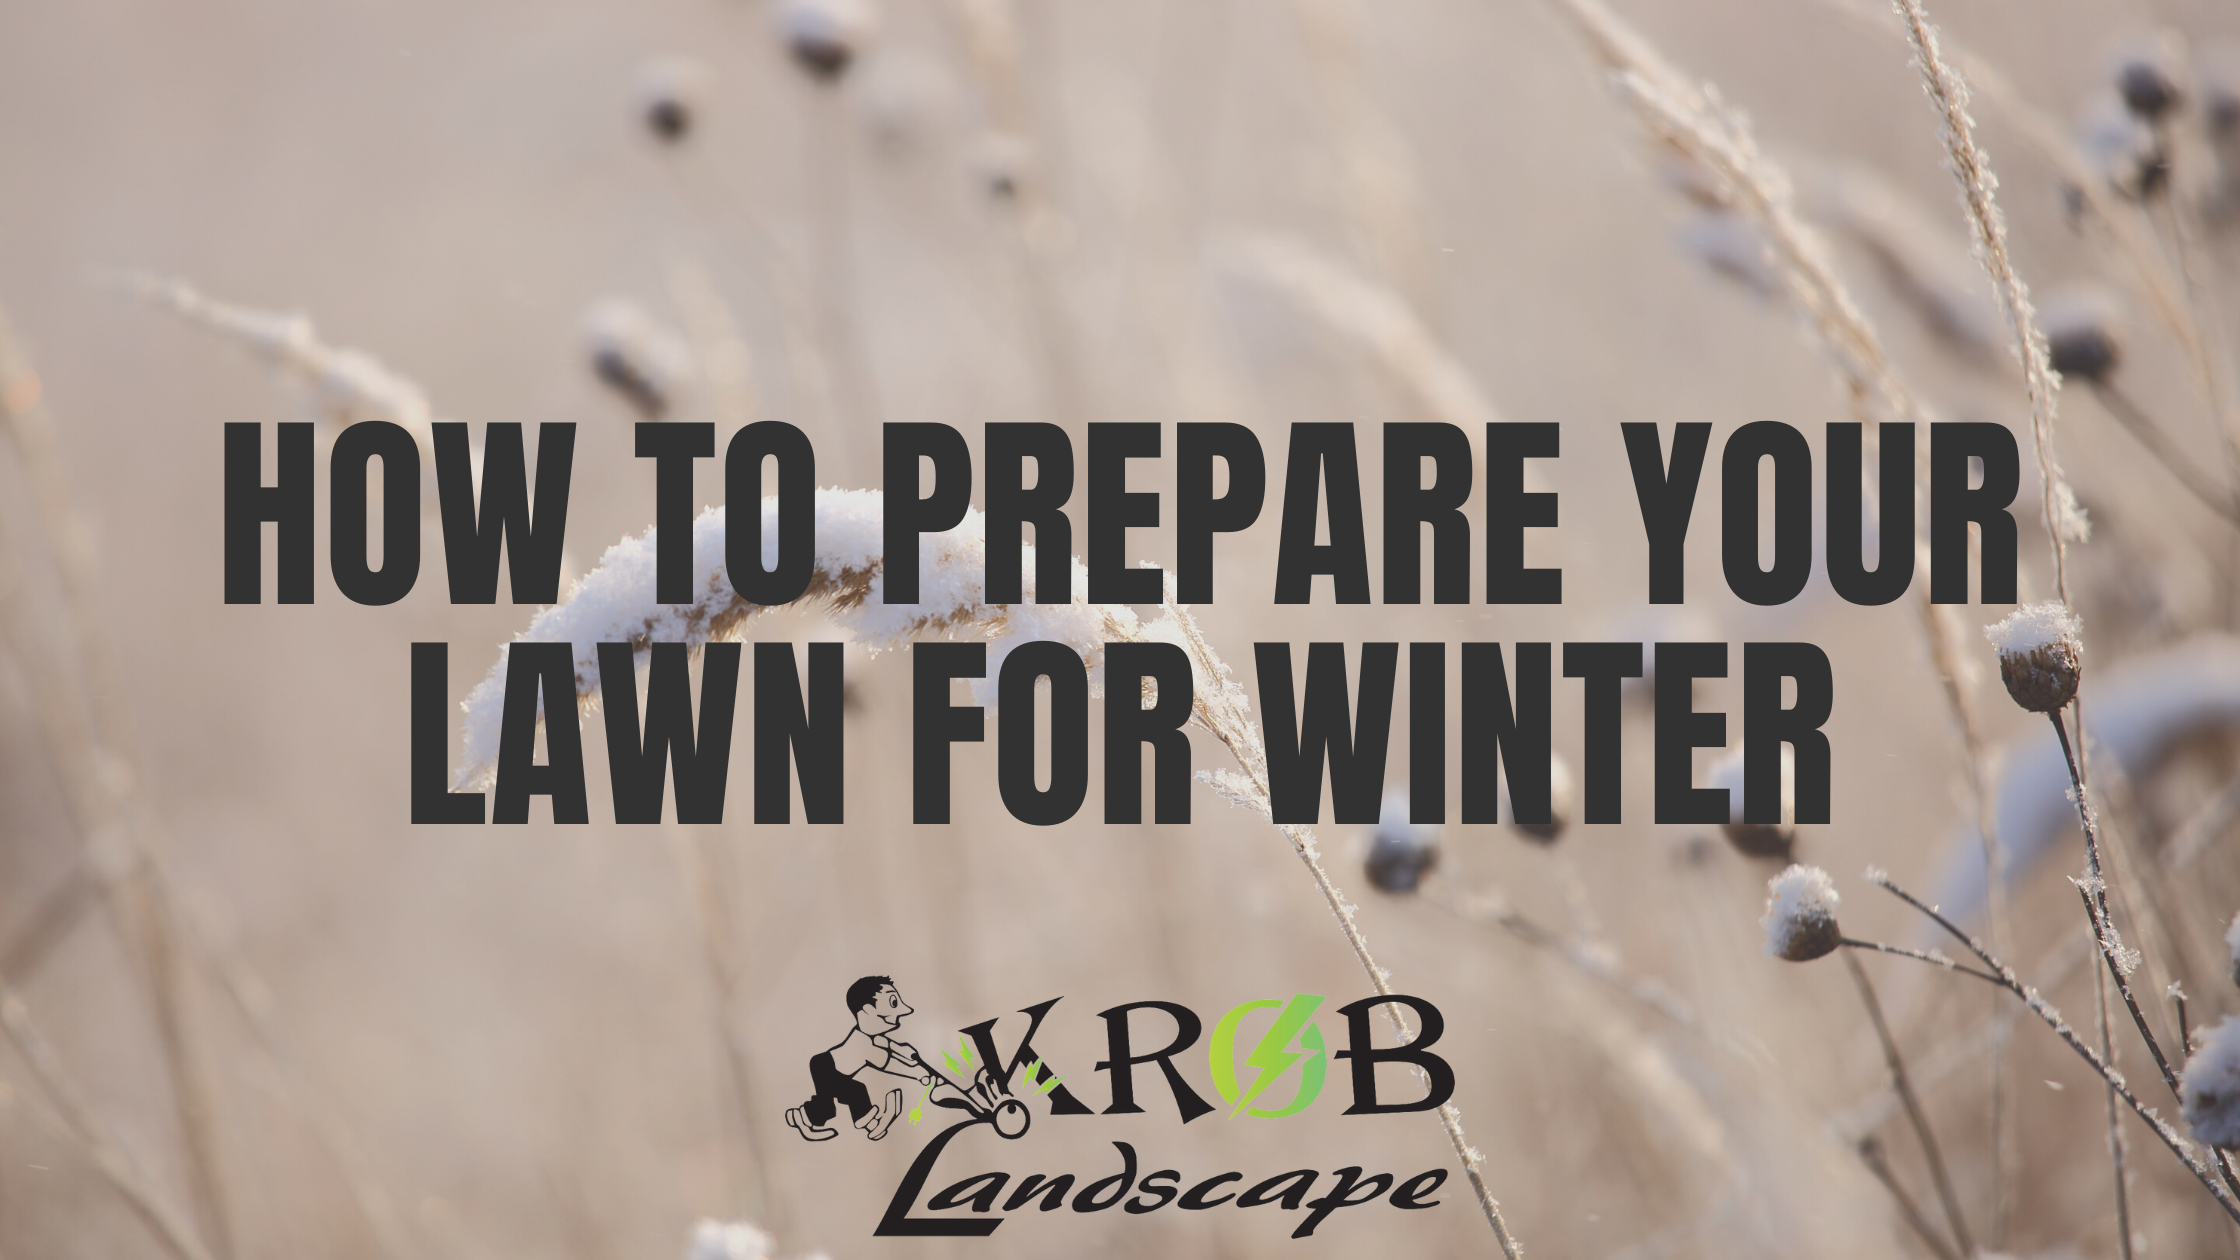 How to Prepare Your Lawn for Winter1.png